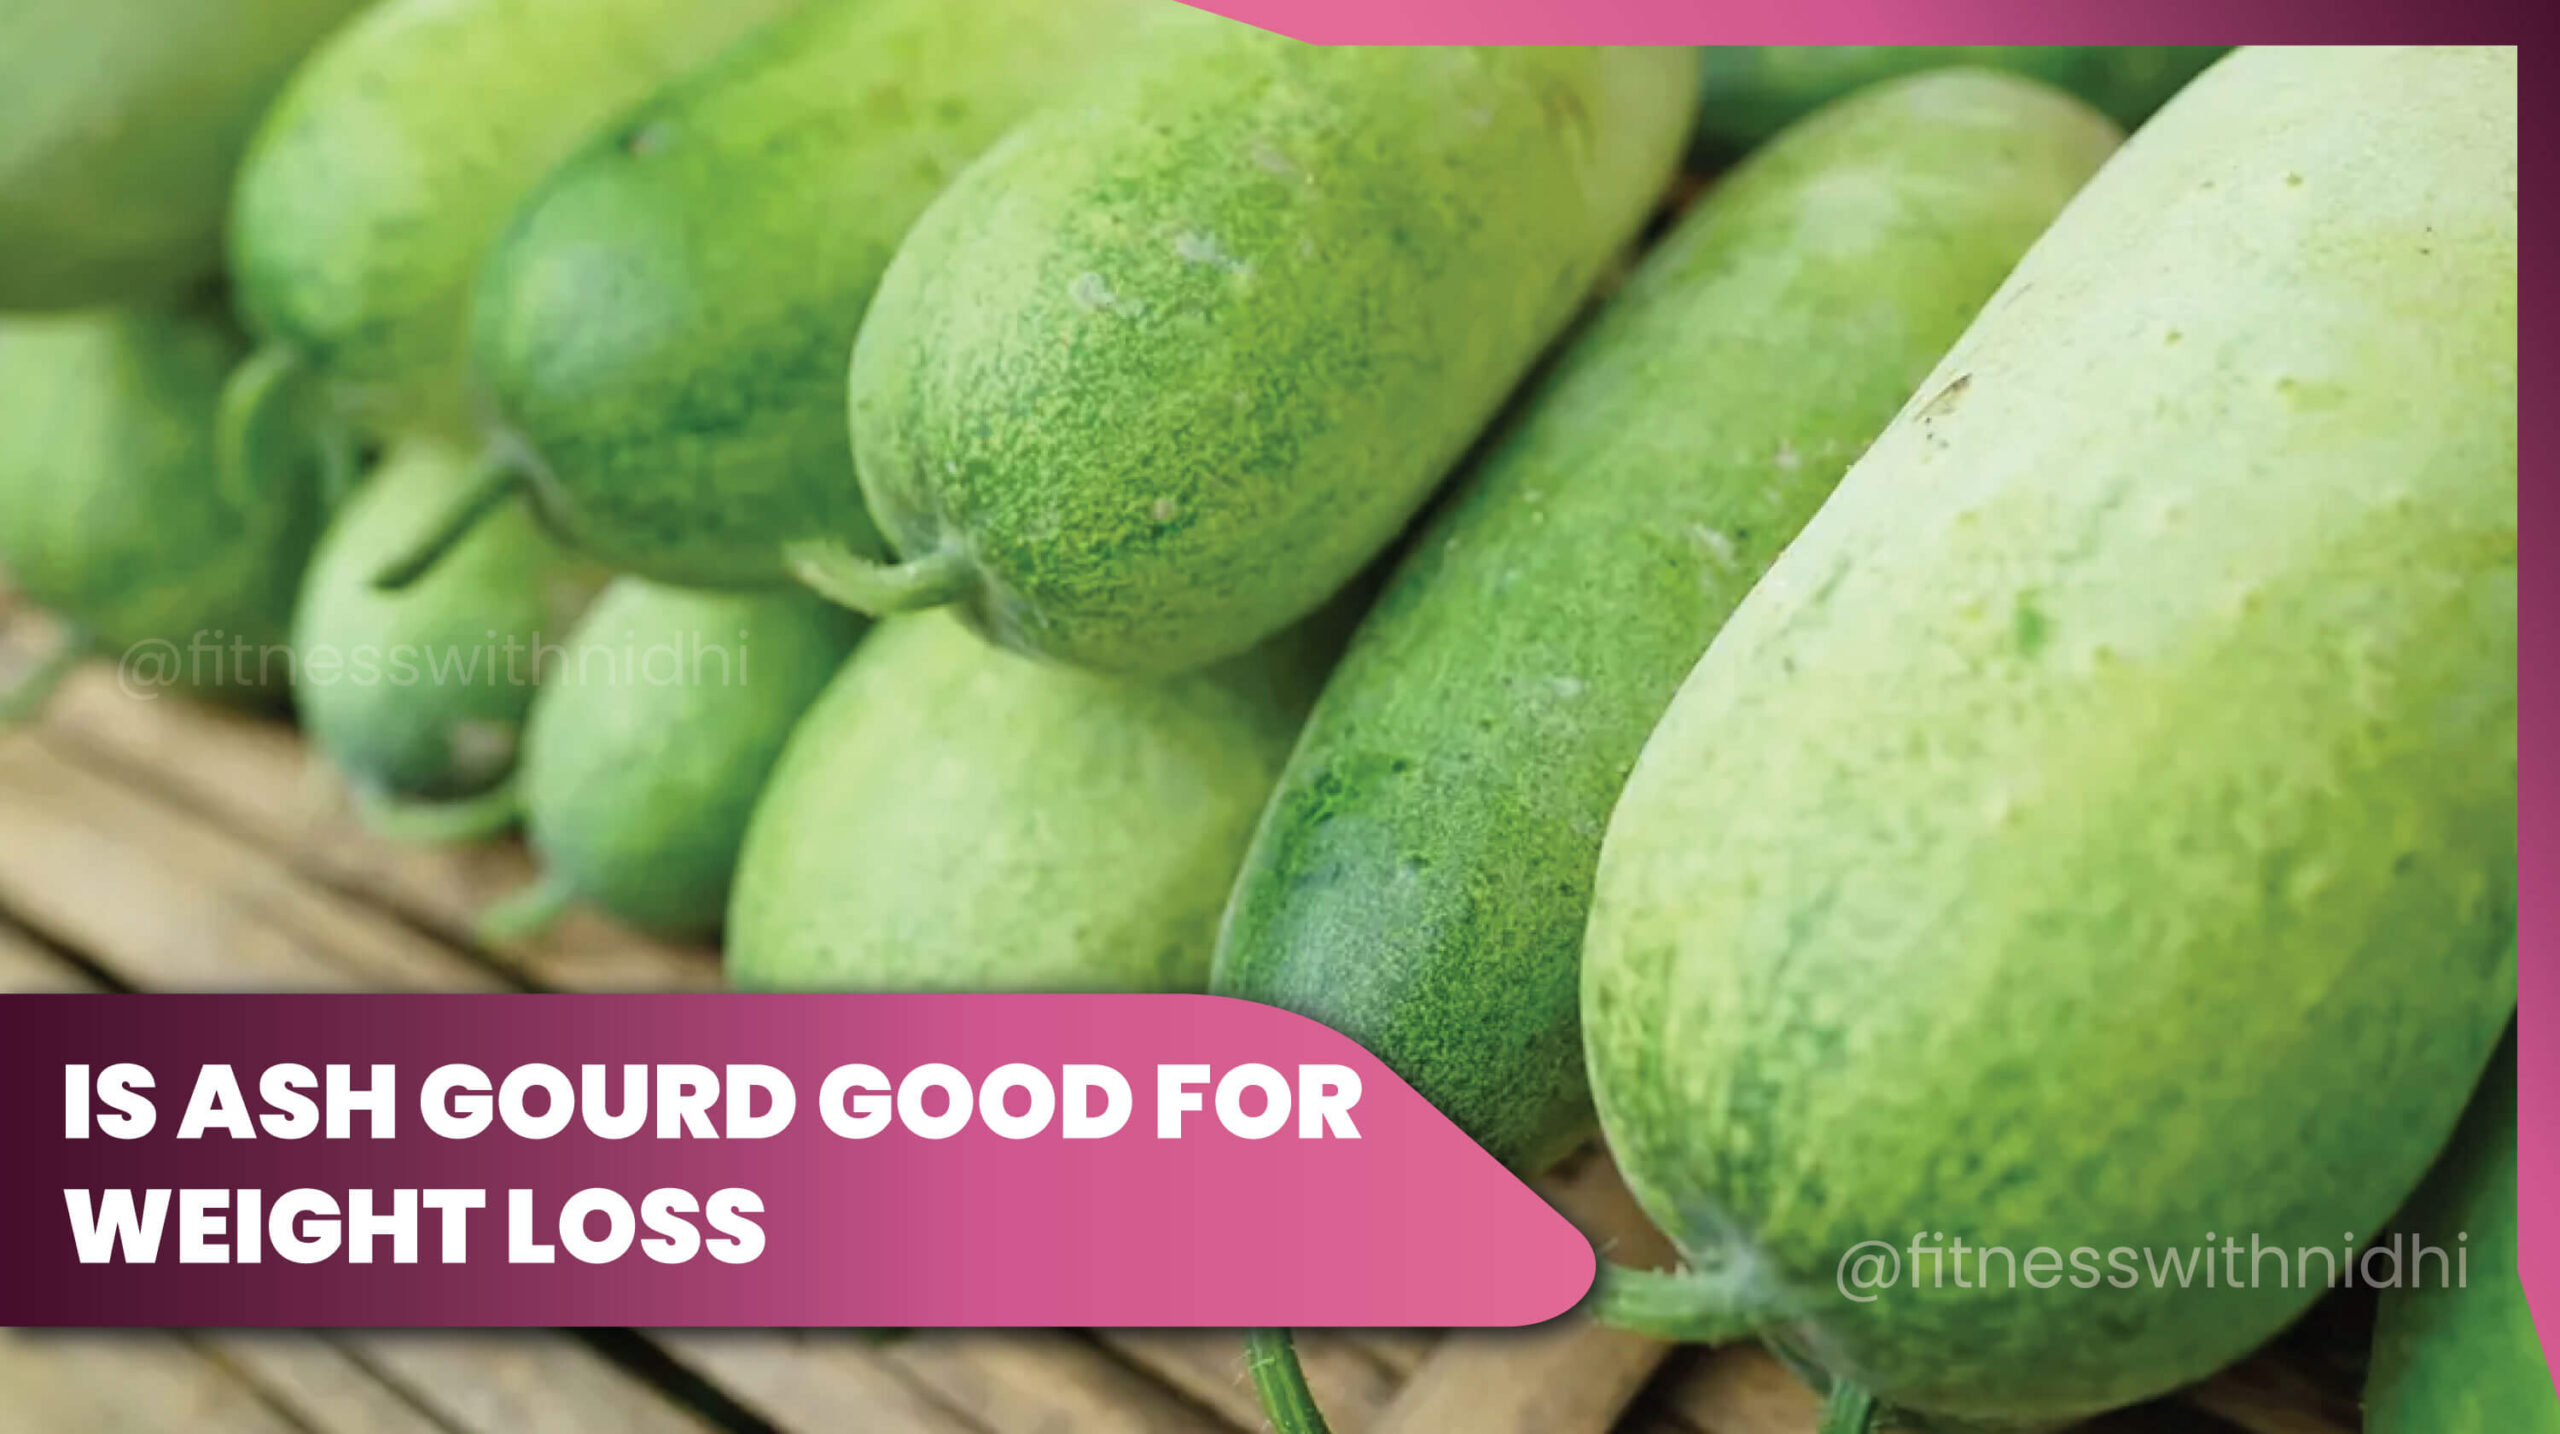 11is ash gourd good for weight loss benefits and side effects